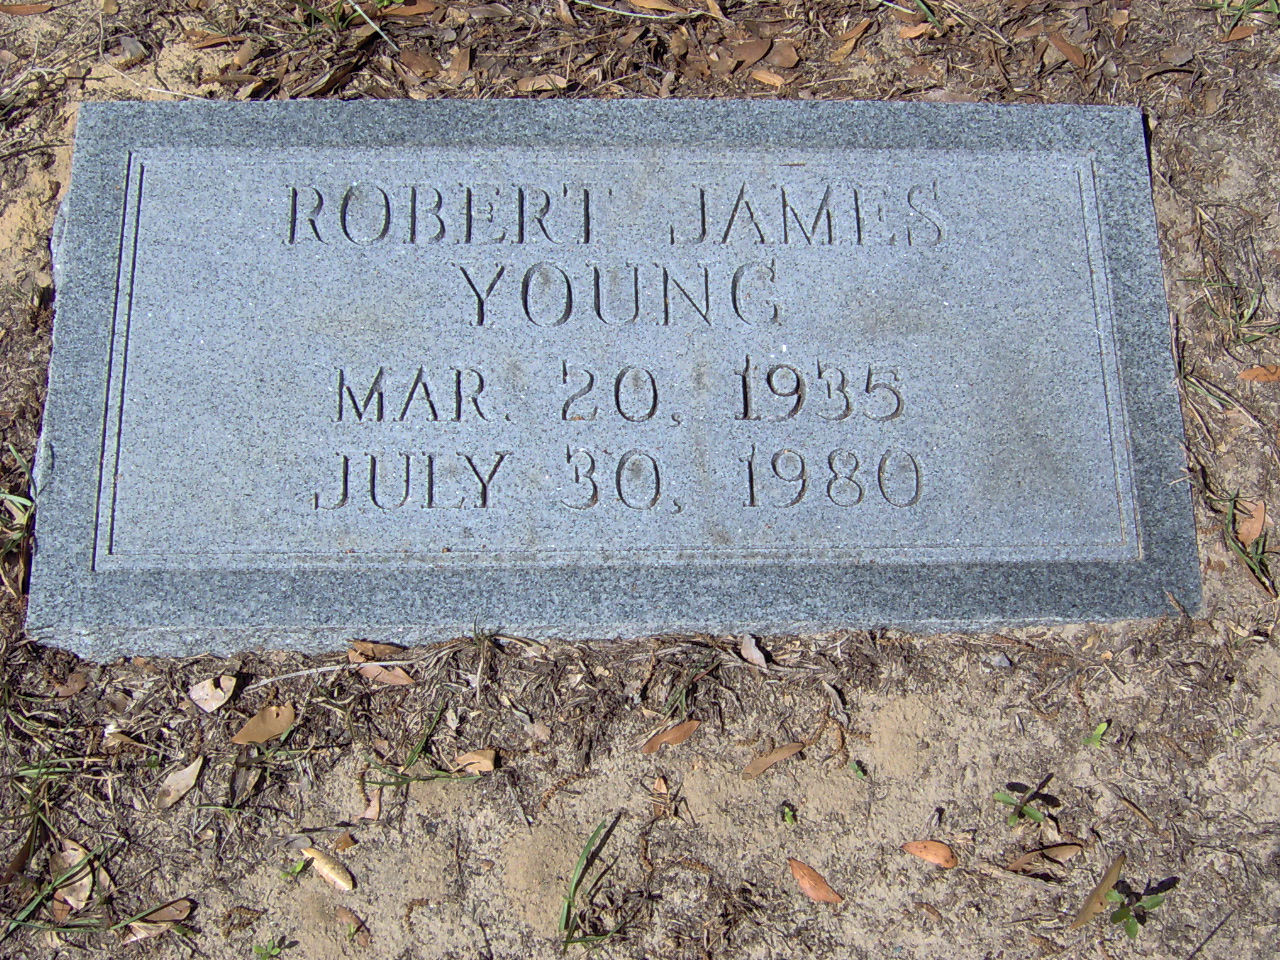 Headstone for Young, Robert James